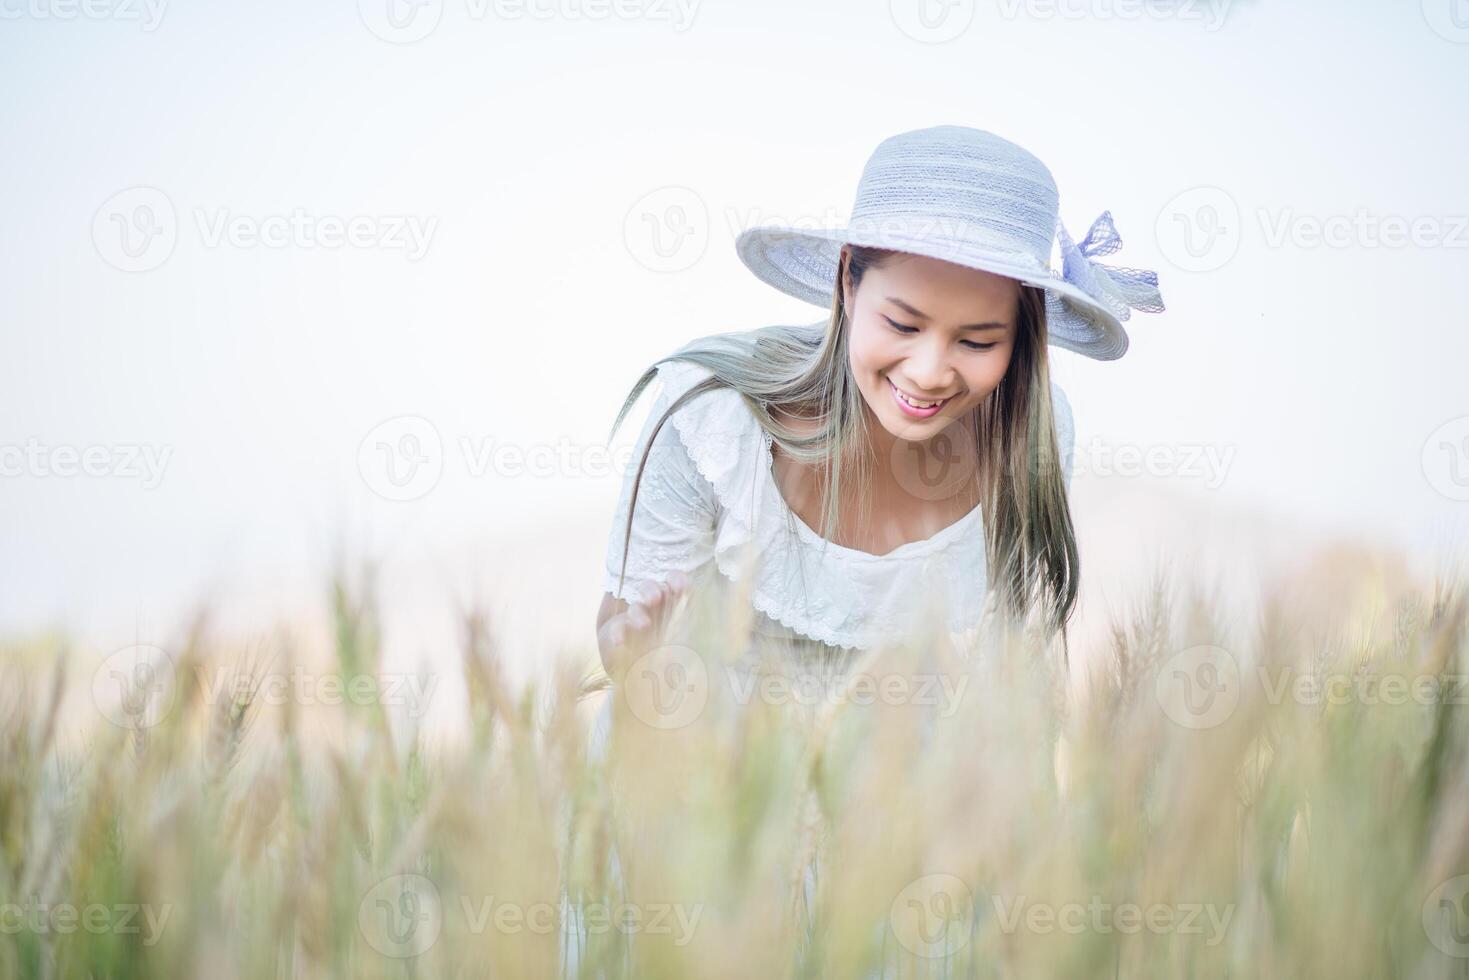 Woman in the hat happiness in the nature photo